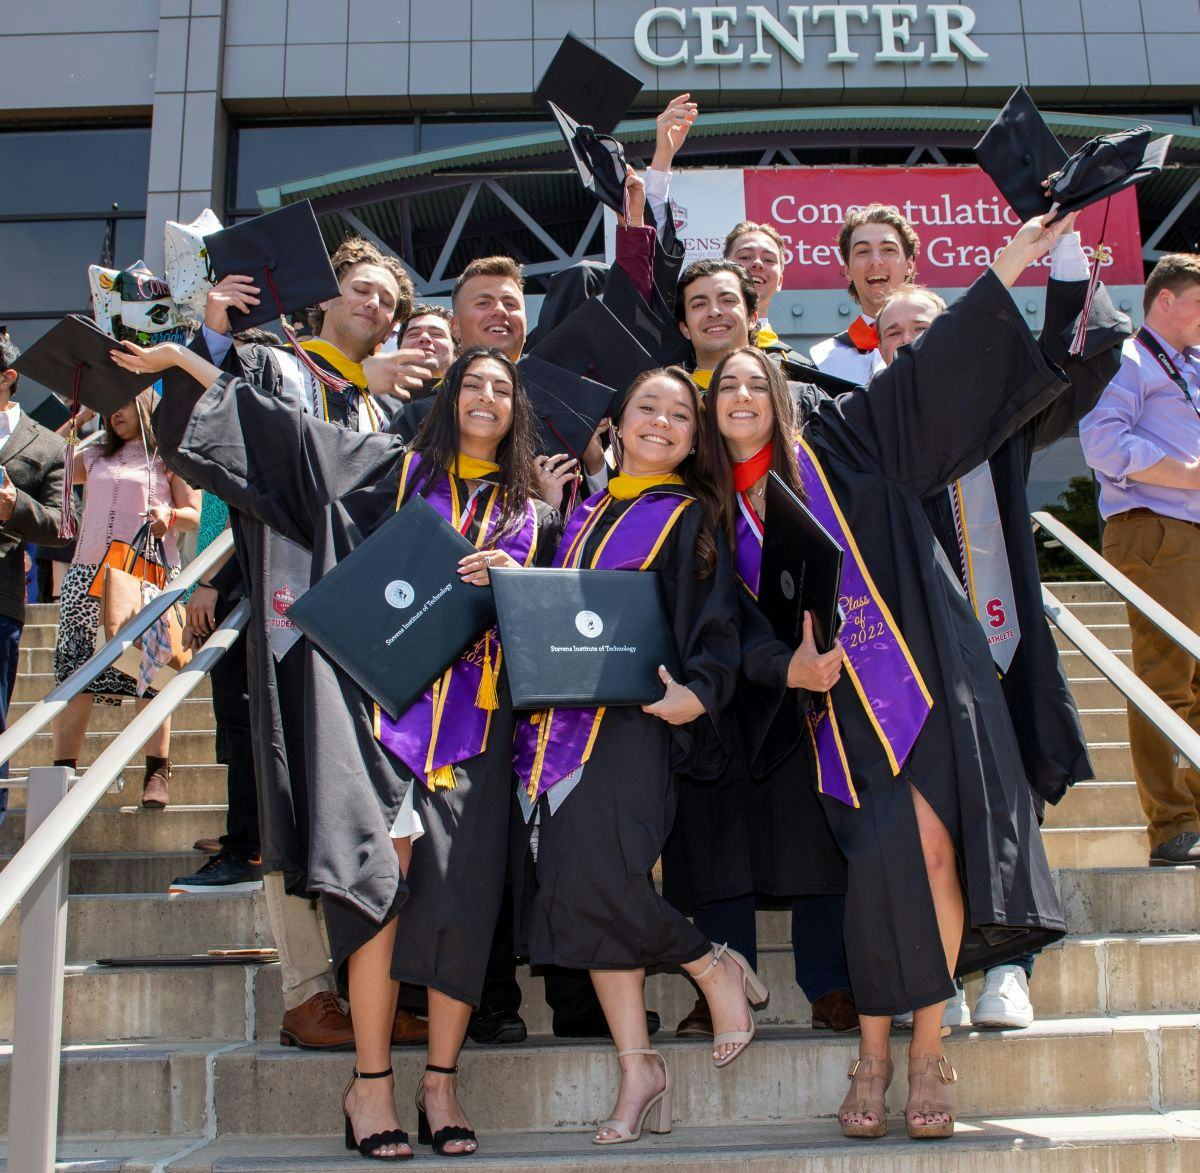 Students pose and smile in cap and gown, holding their diplomas, on the steps of Meadowlands Exposition Center